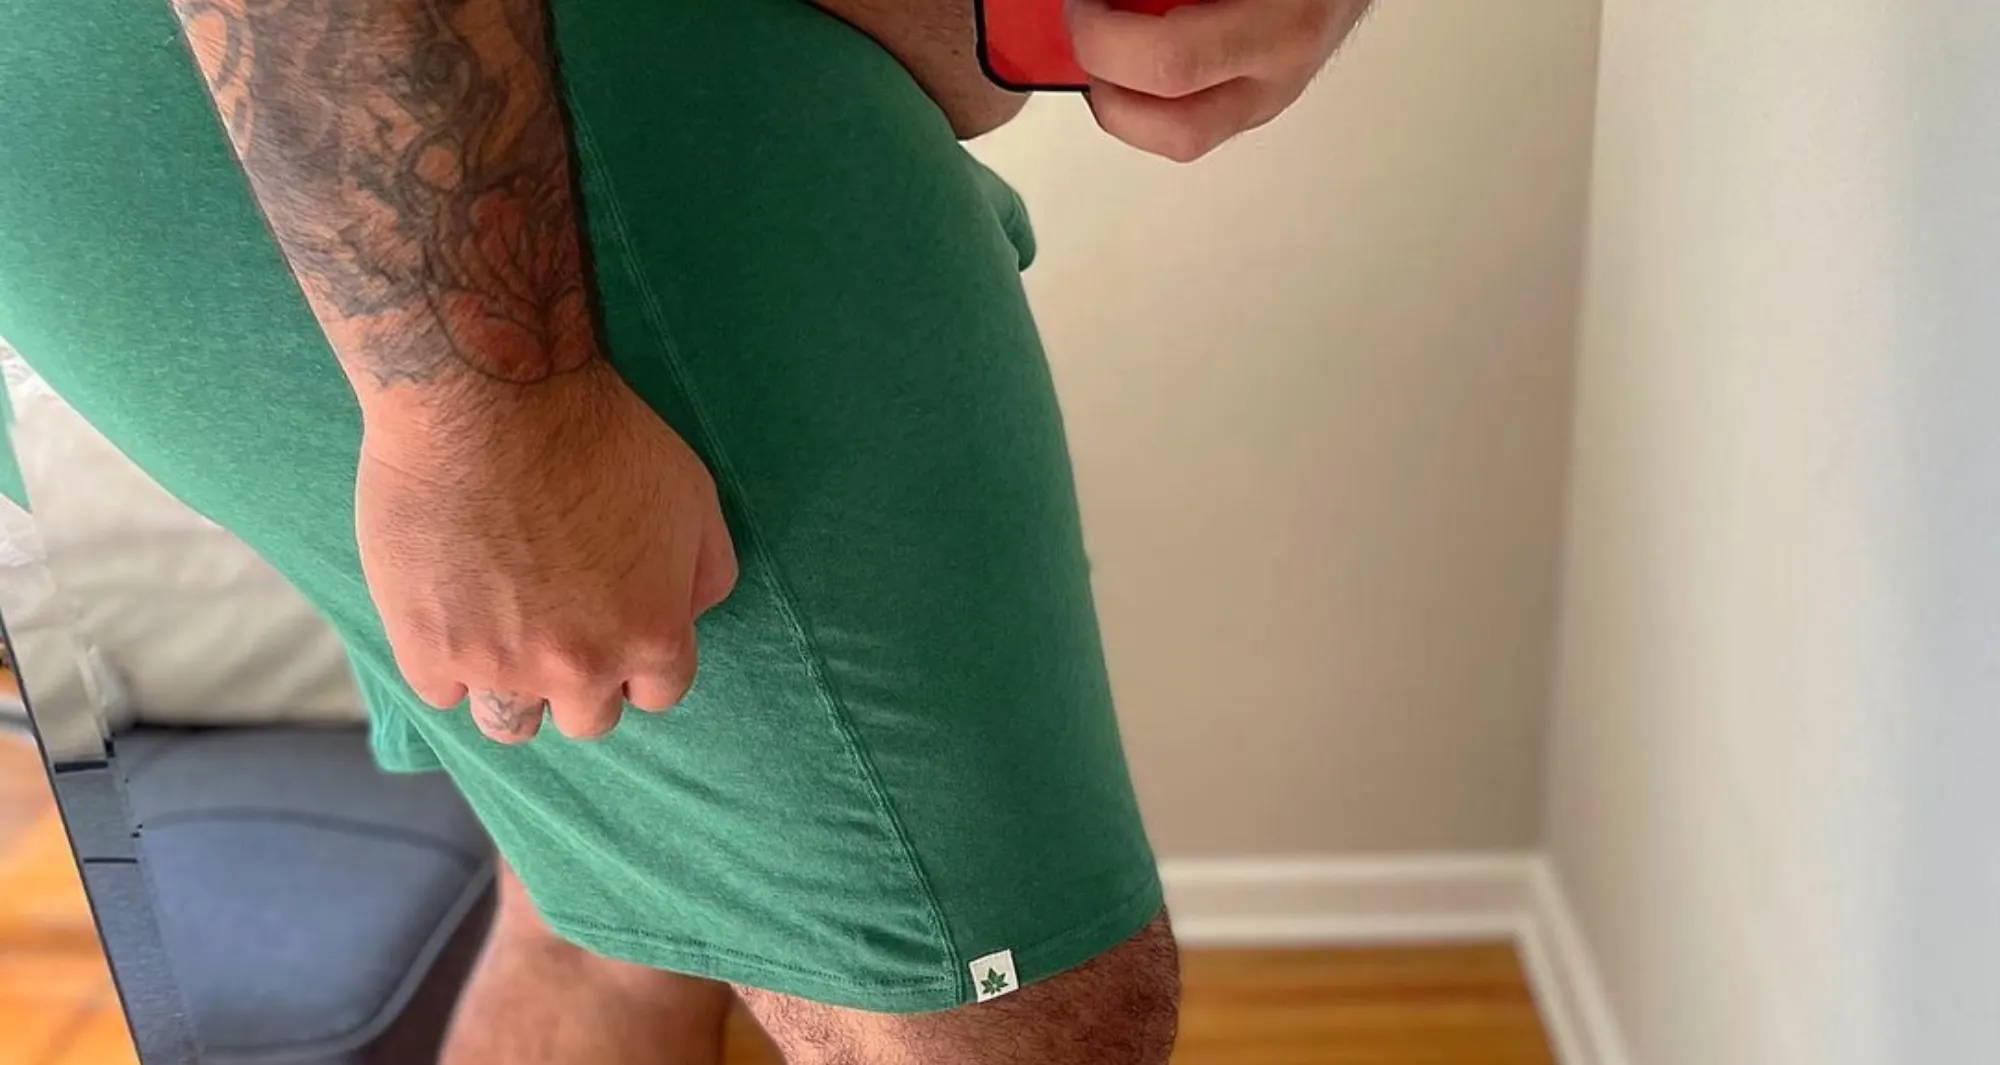  man with thicker thighs wearing green boxers with his tattooed arm in front taking a mirror selfie